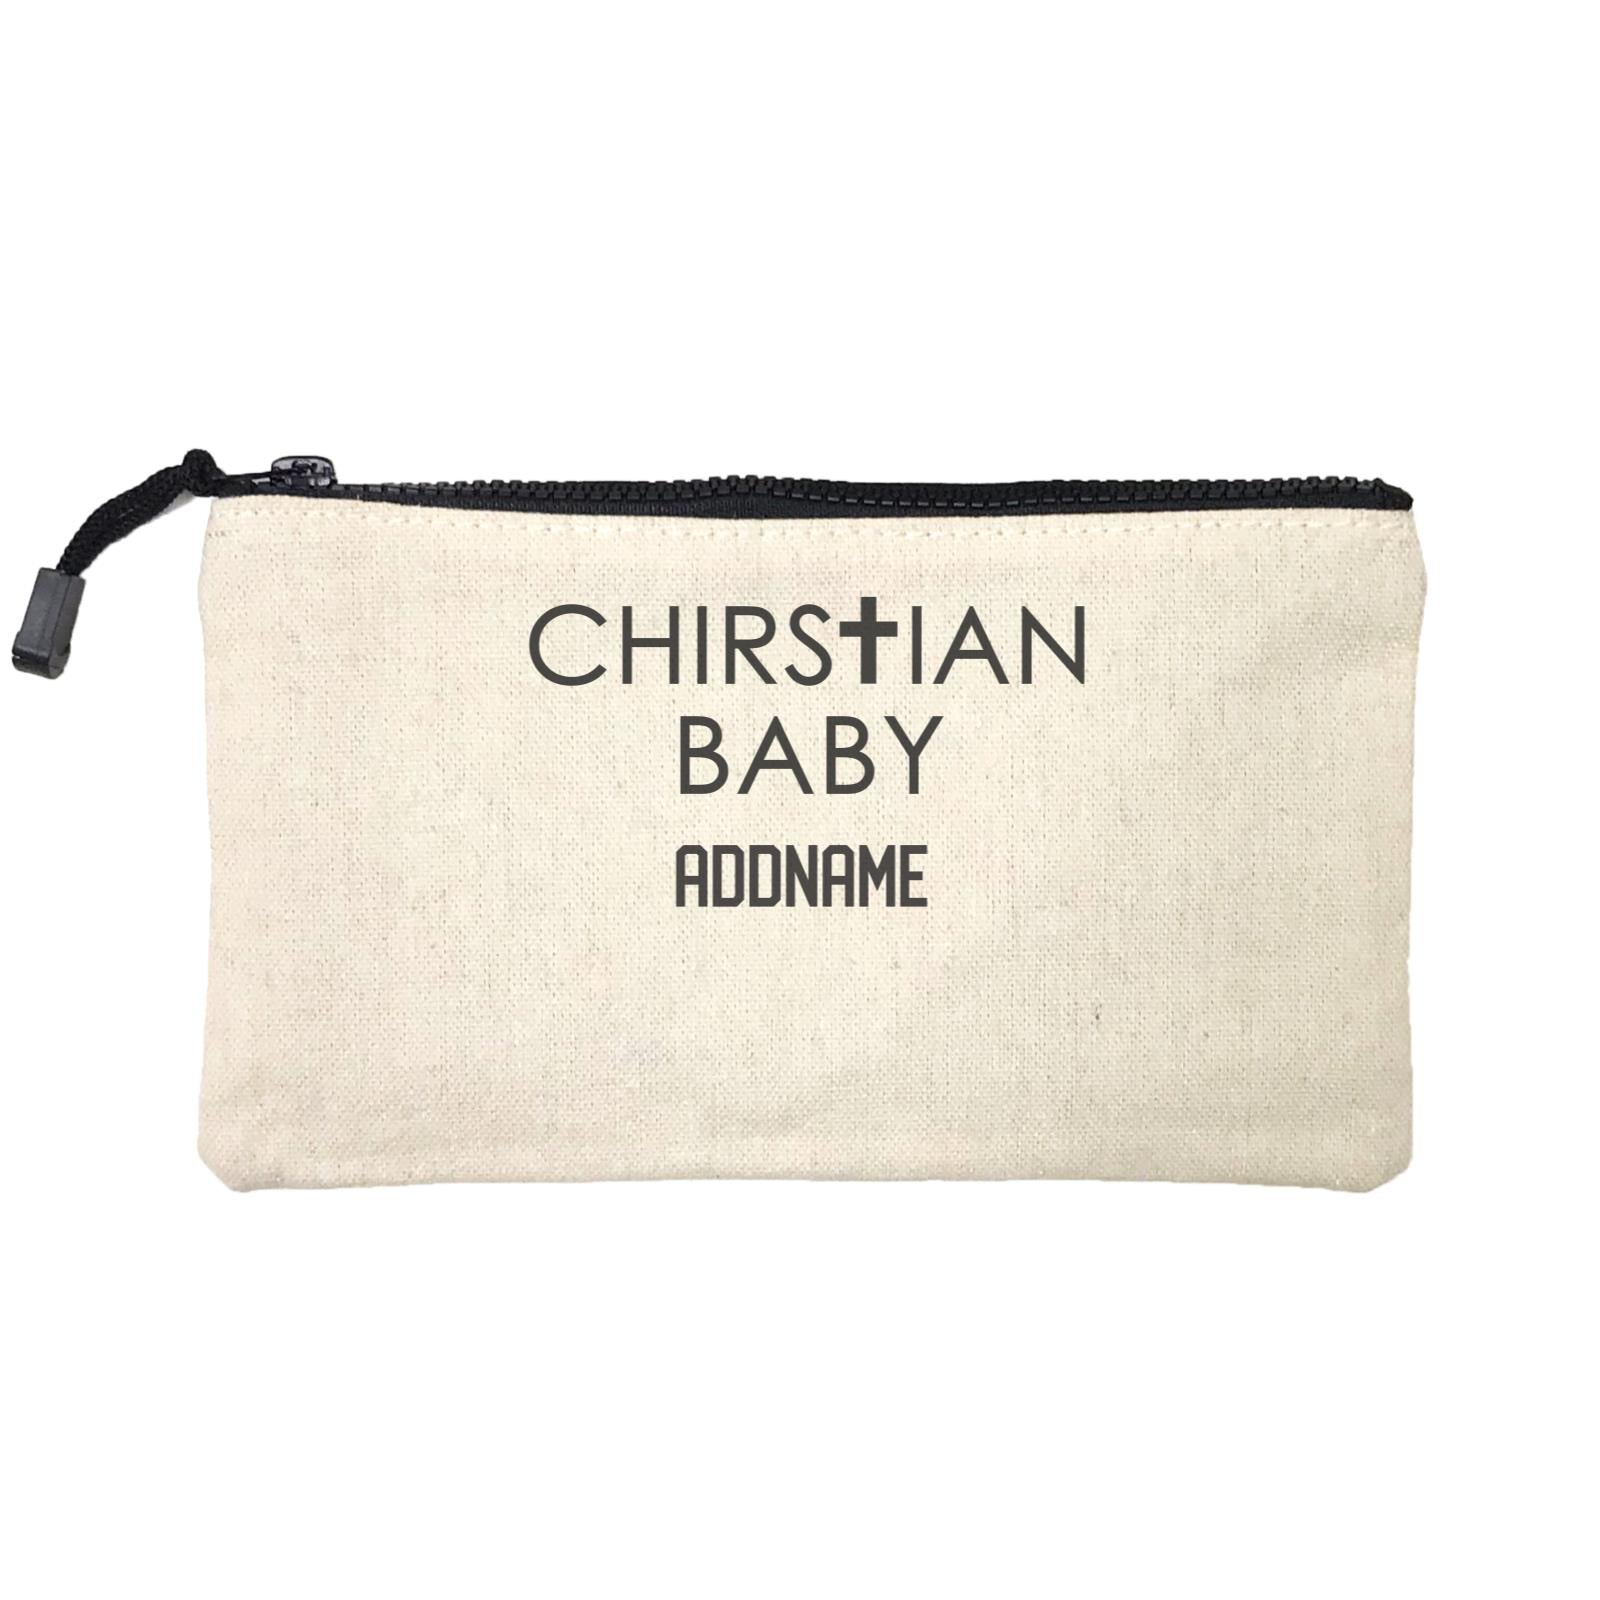 Christian Baby Christian Baby with Cross Addname  Mini Accessories Stationery Pouch